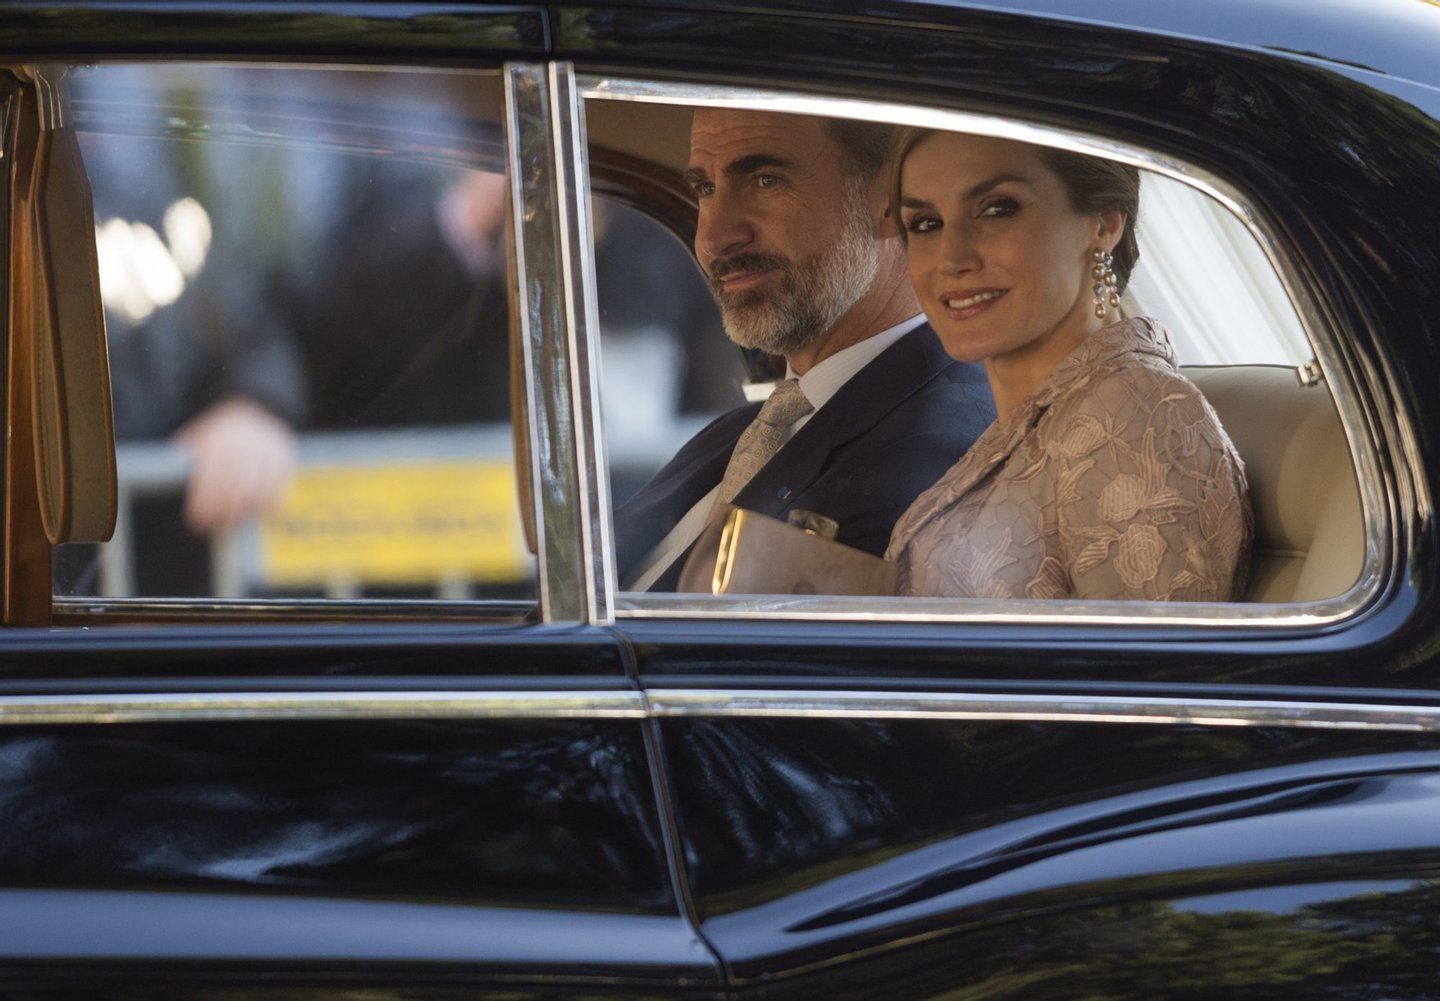 Spain's king Felipe VI (L) and his wife queen Letizia arrive at Porto on November 28, 2016 on the first day of their three days state visit to Portugal. / AFP / MIGUEL RIOPA (Photo credit should read MIGUEL RIOPA/AFP/Getty Images)